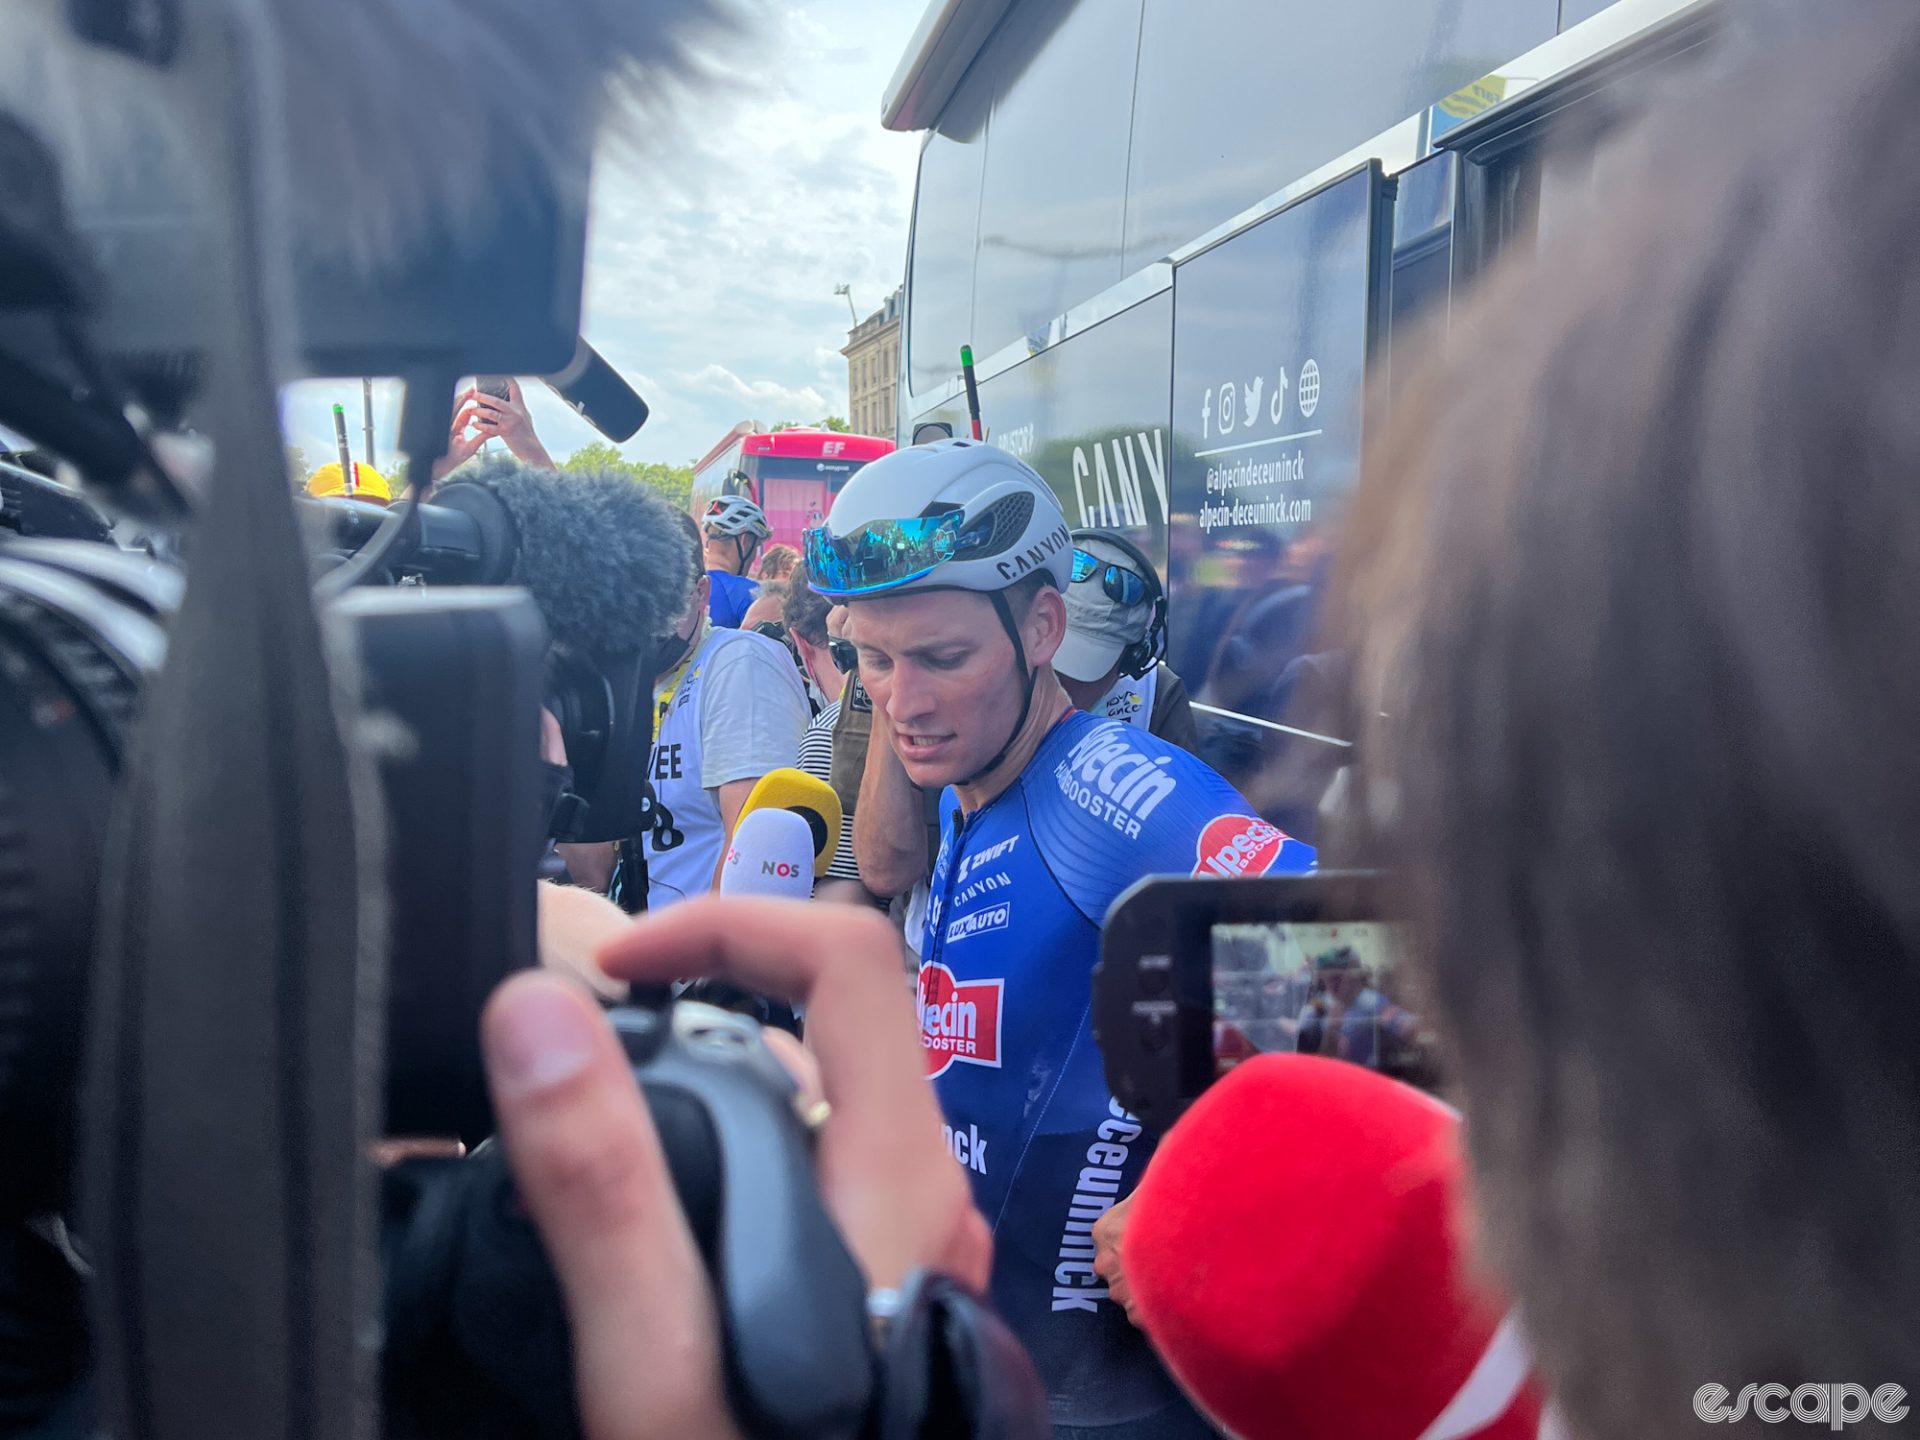 Mathieu van der Poel outside the Alpecin bus. He's seen from the perspective of someone inside the scrum of media.